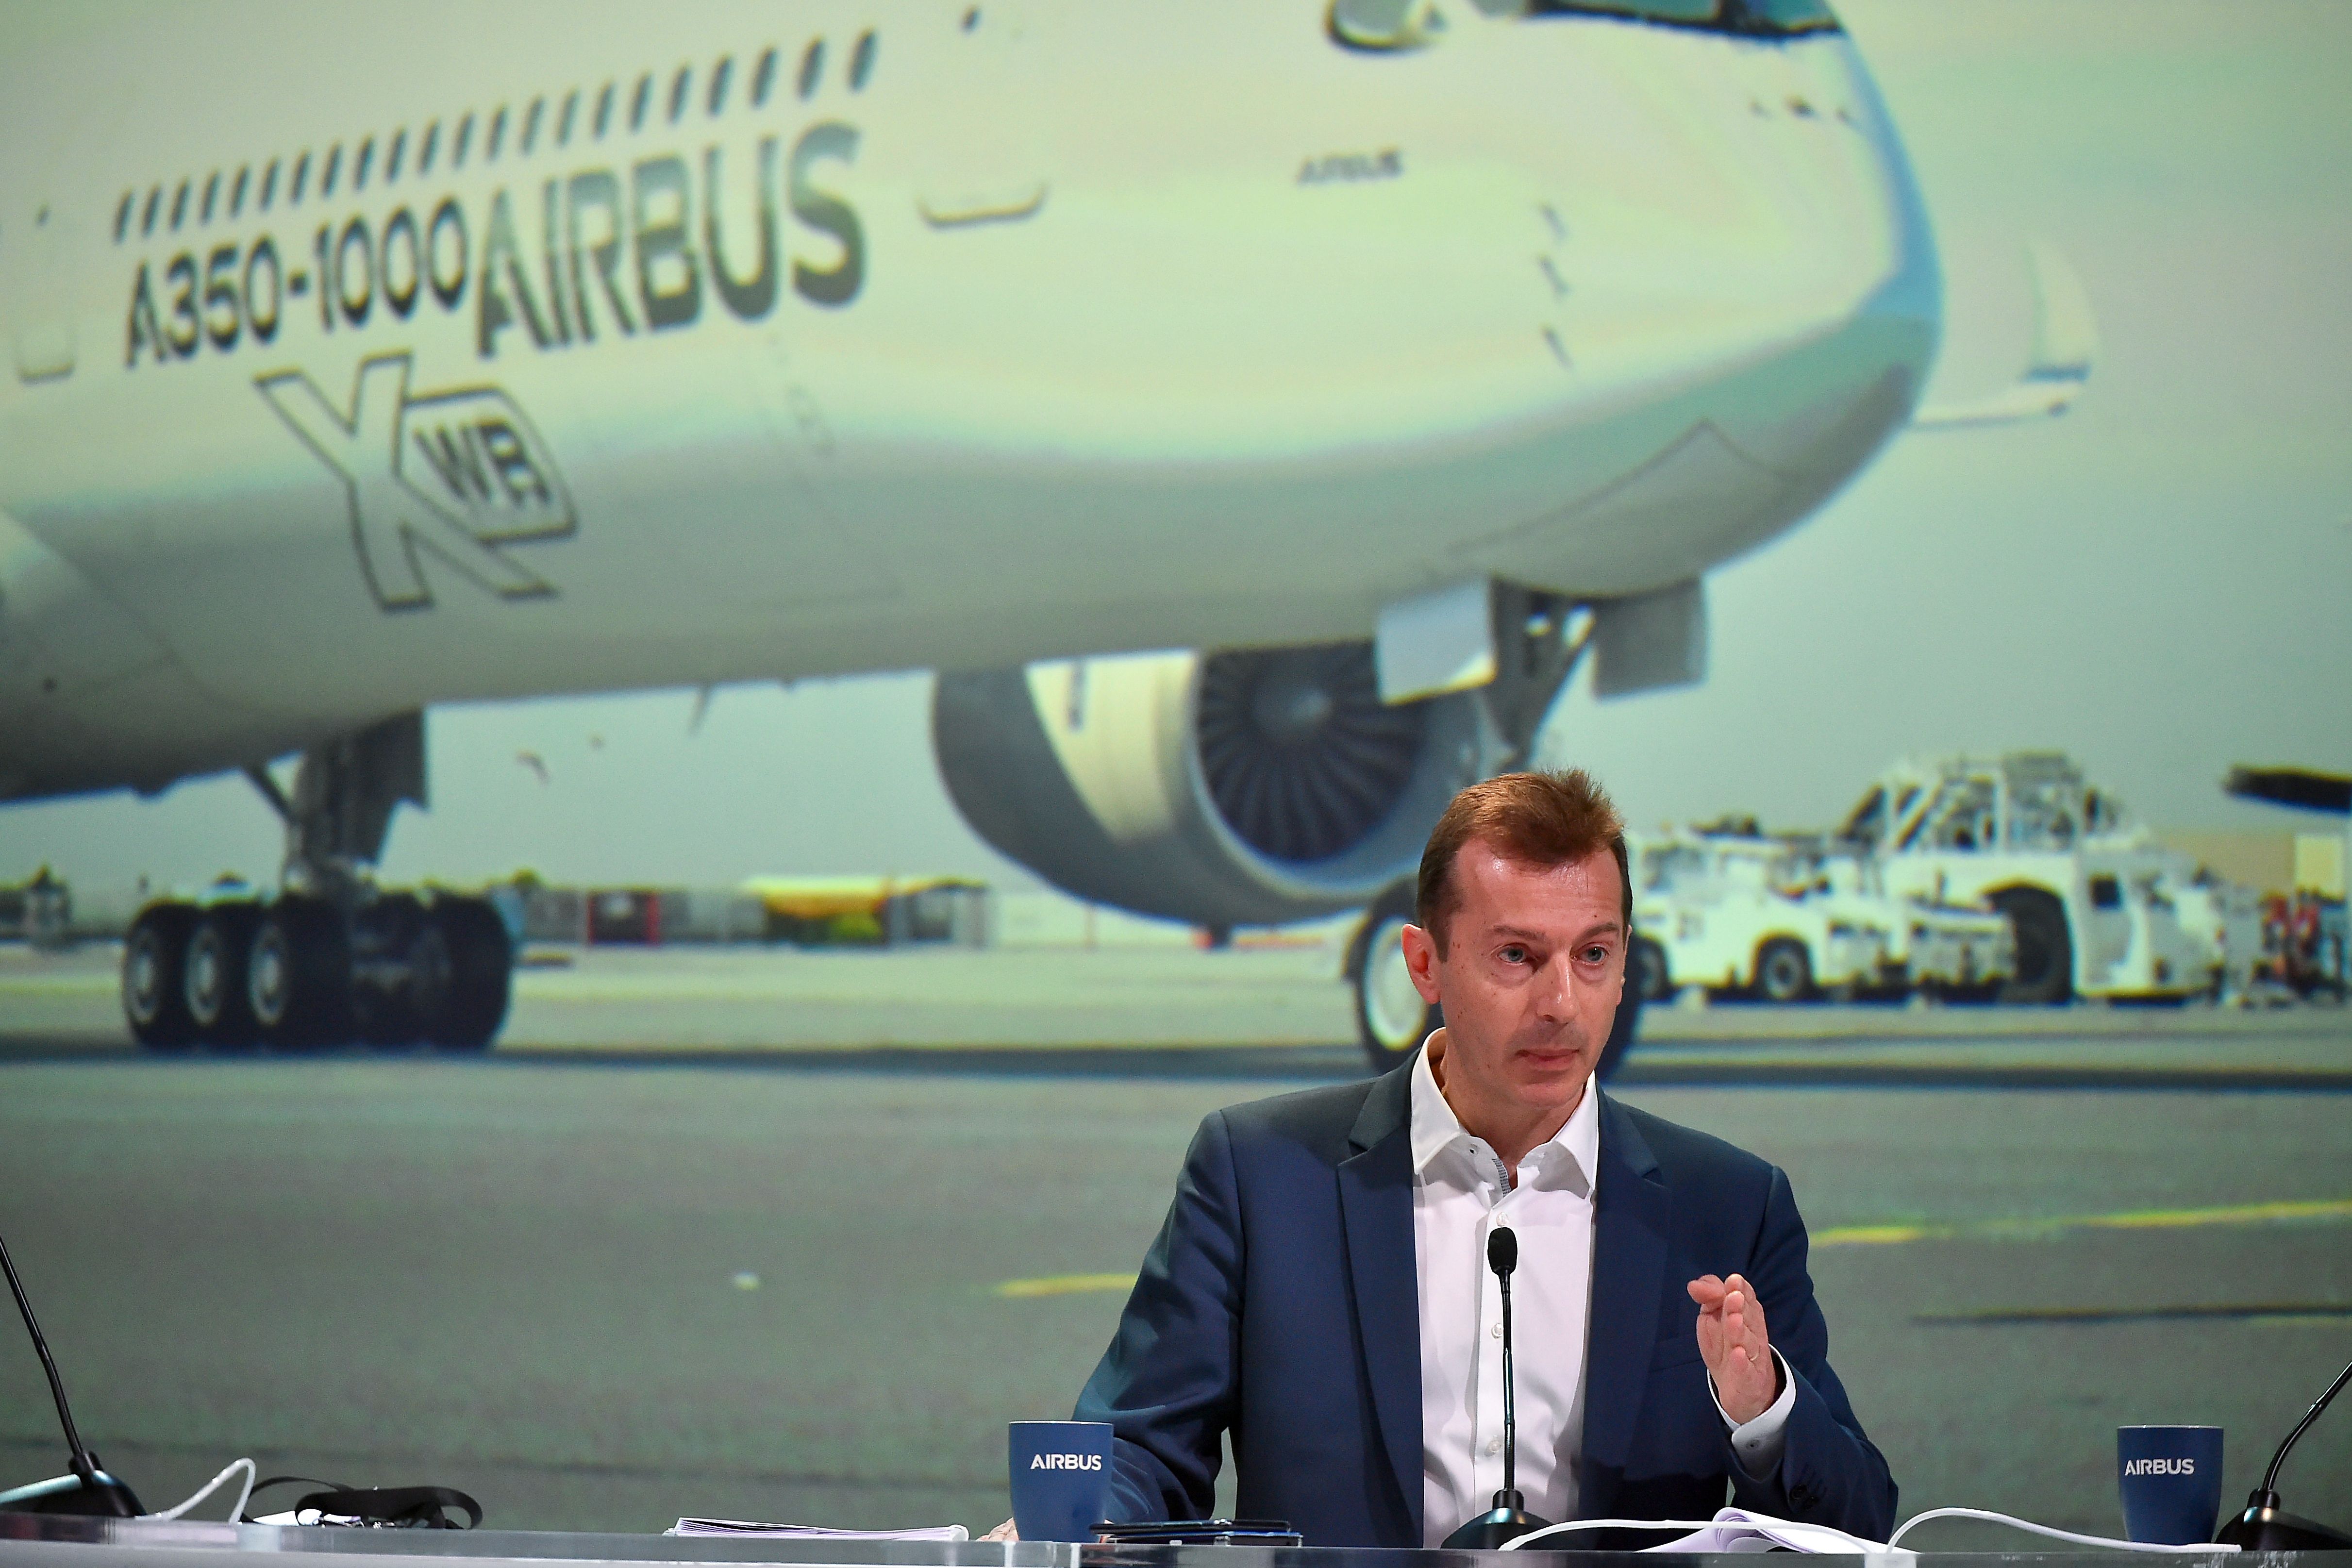 The president of Airbus Commercial Aircraft Business Guillaume Faury speaks during a press conference to announce the annual results of the company, in Blagnac, on February 14, 2019. - Europe